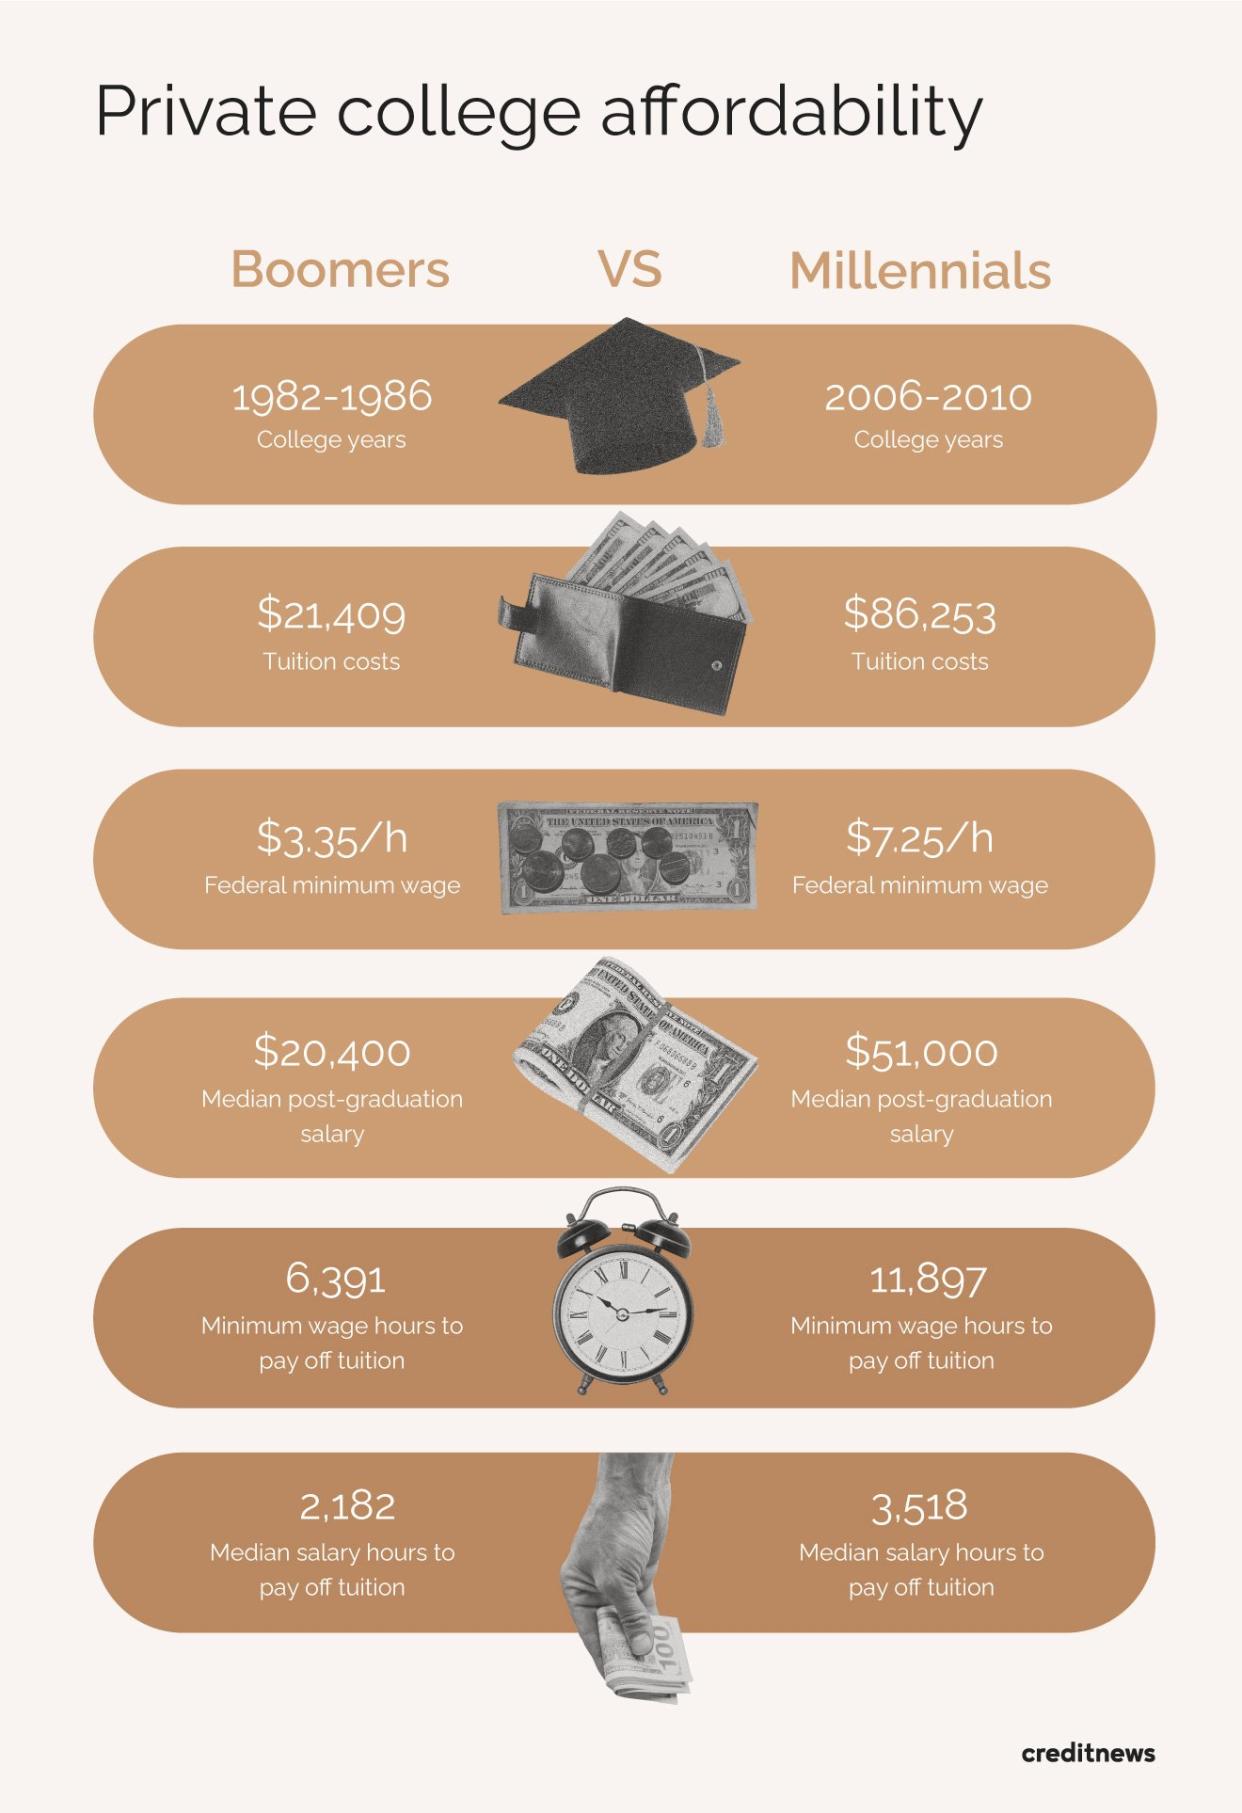 infographic comparing private college statistics for each generation